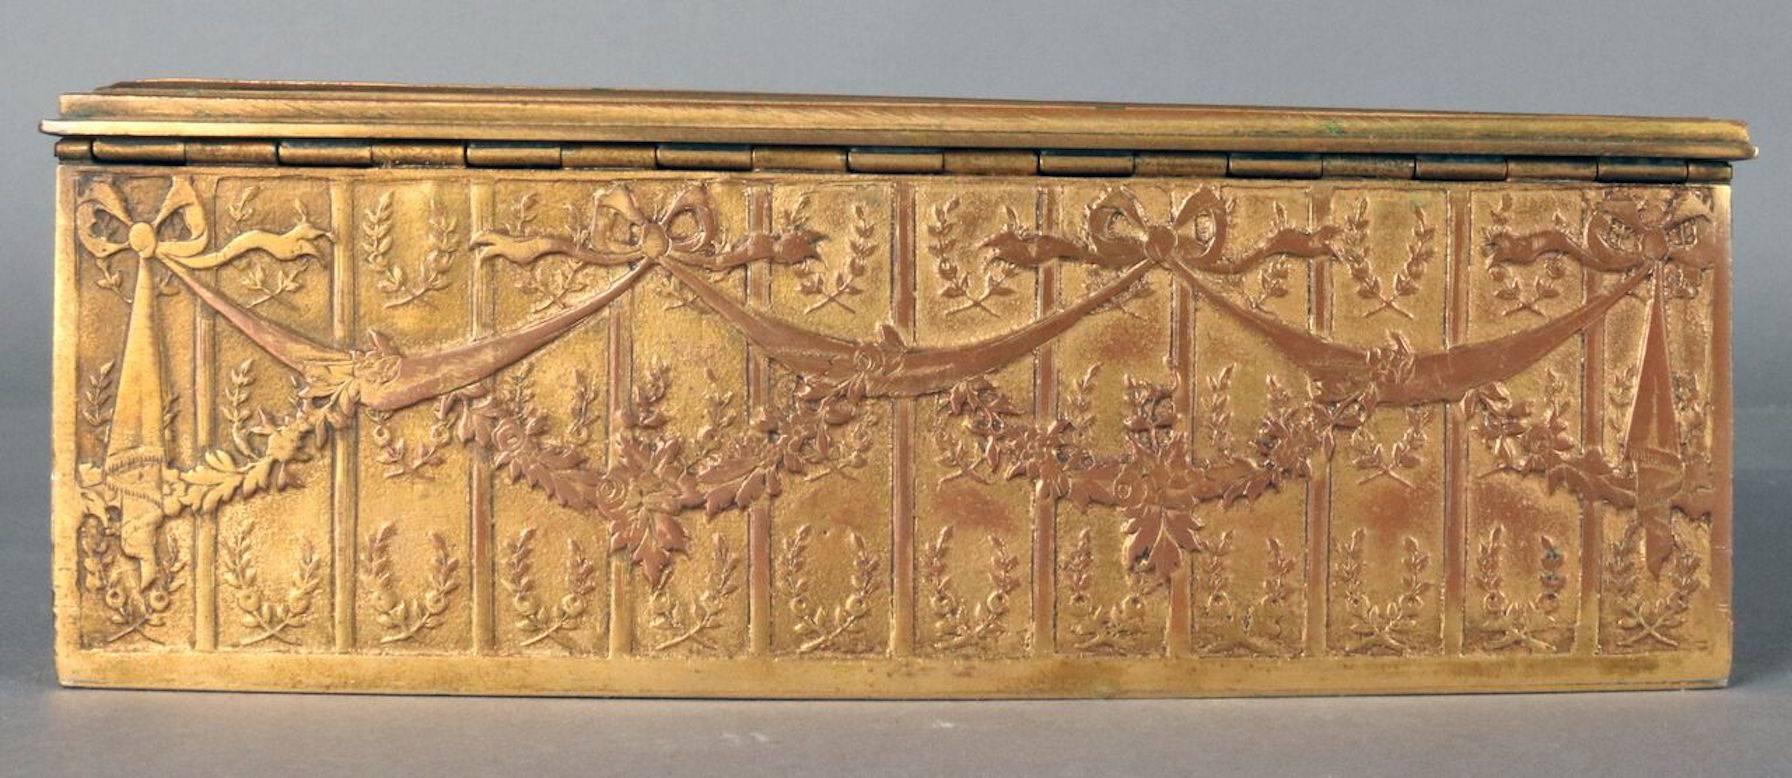 Antique French Gilt Cast Bronze Hand Painted Sewing Box, 19th Century 1